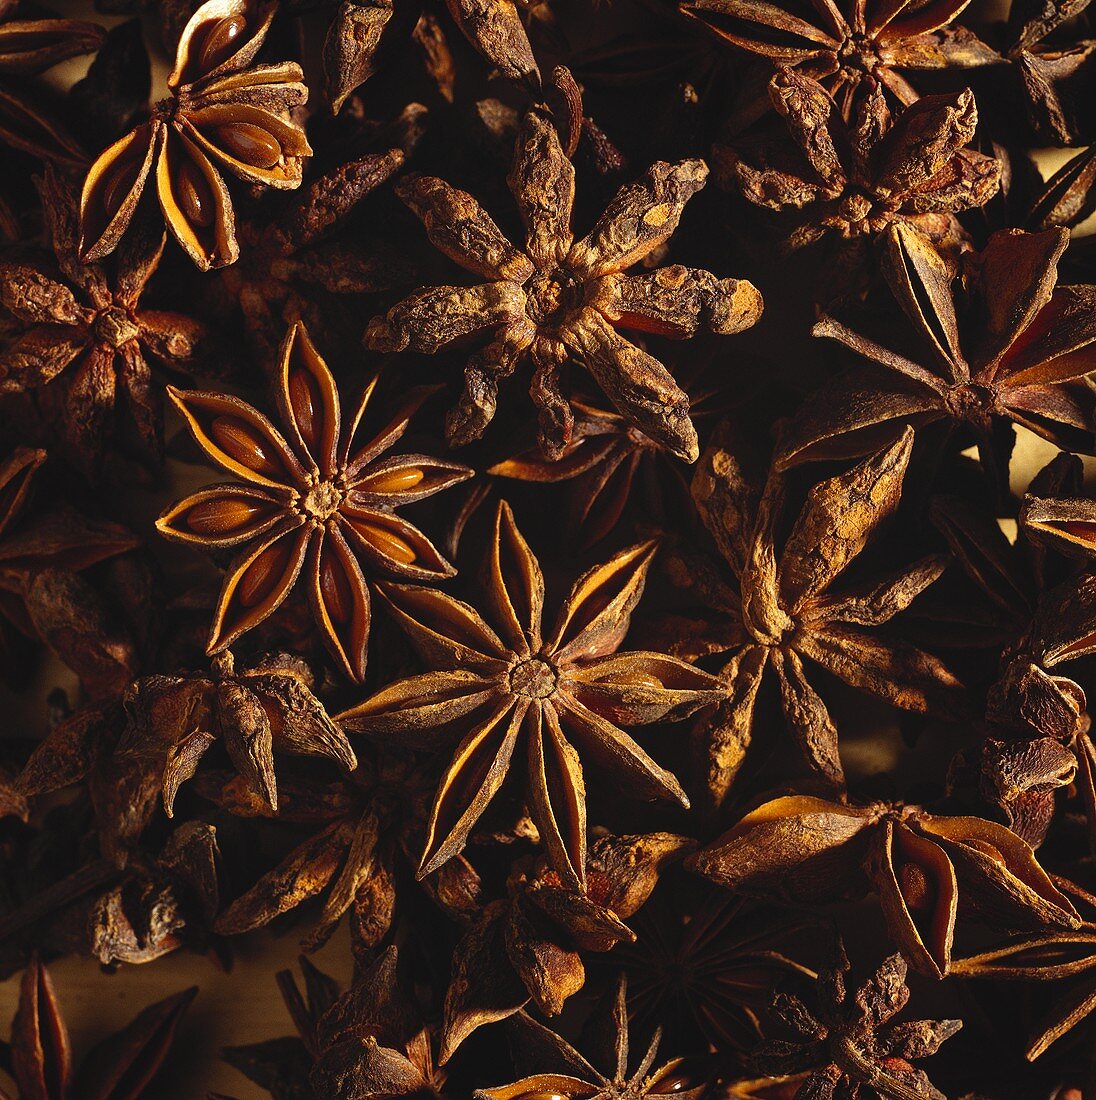 Star anise (filling the picture)